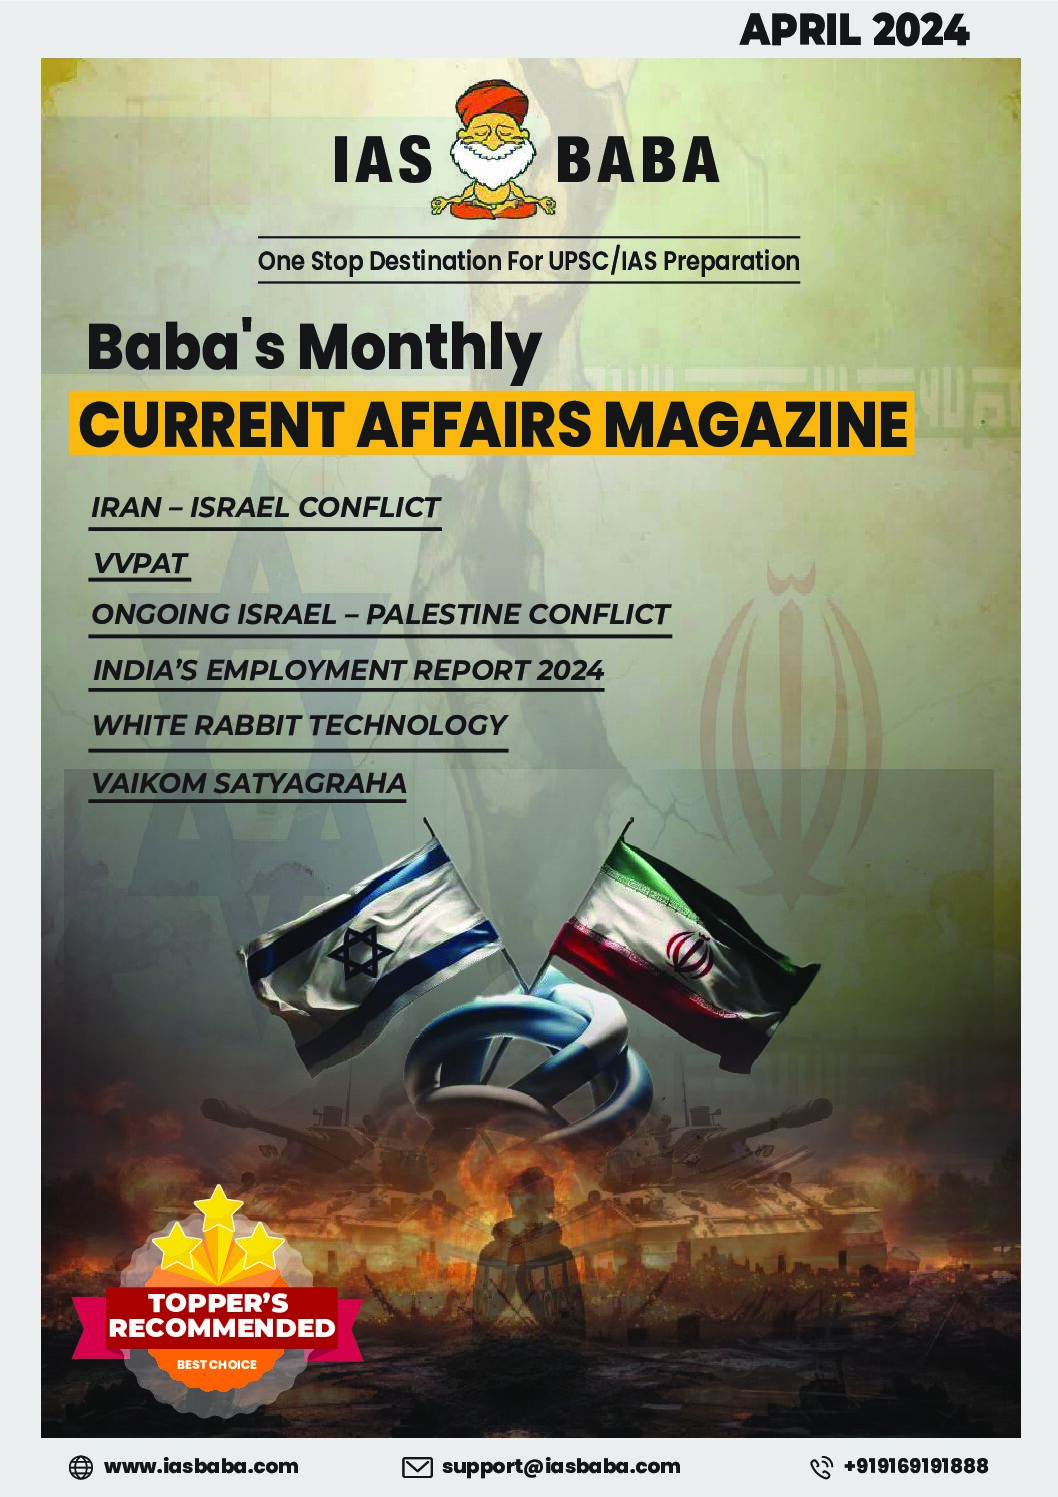 IASBABAS Current Affairs Monthly Magazine April 2024